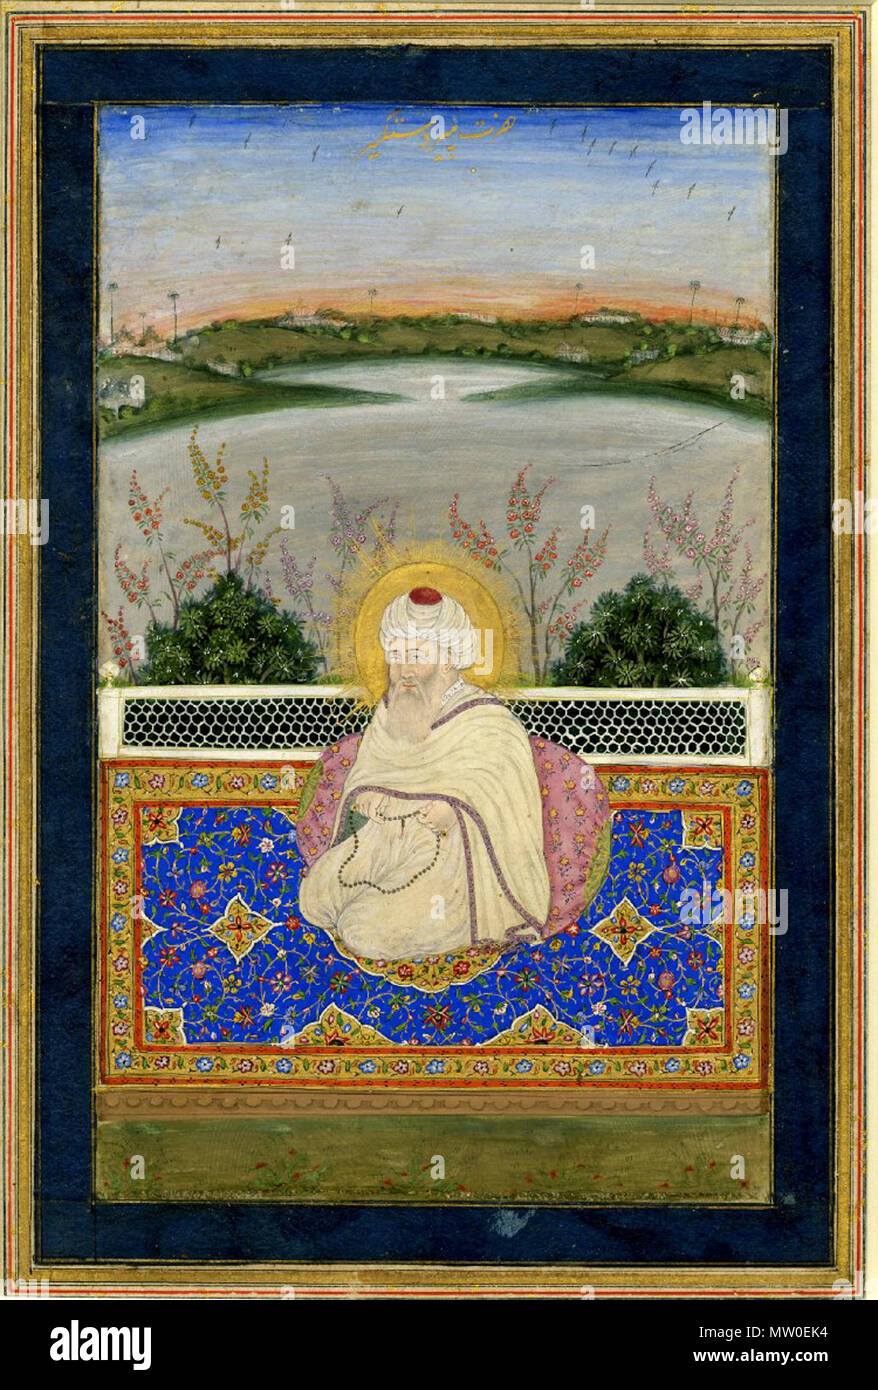 . English: Pir Dastgir India, Mughal School, Late 18th century Opaque watercolour on paper Posthumous portraits of important religious and political figures were very popular in 18th-century Mughal India. This figure would have been a pir, the founder of a dervish order, but it is not now certain to which group he belonged. late 18th century. Mughal Style 485 Pir Dastgir Stock Photo